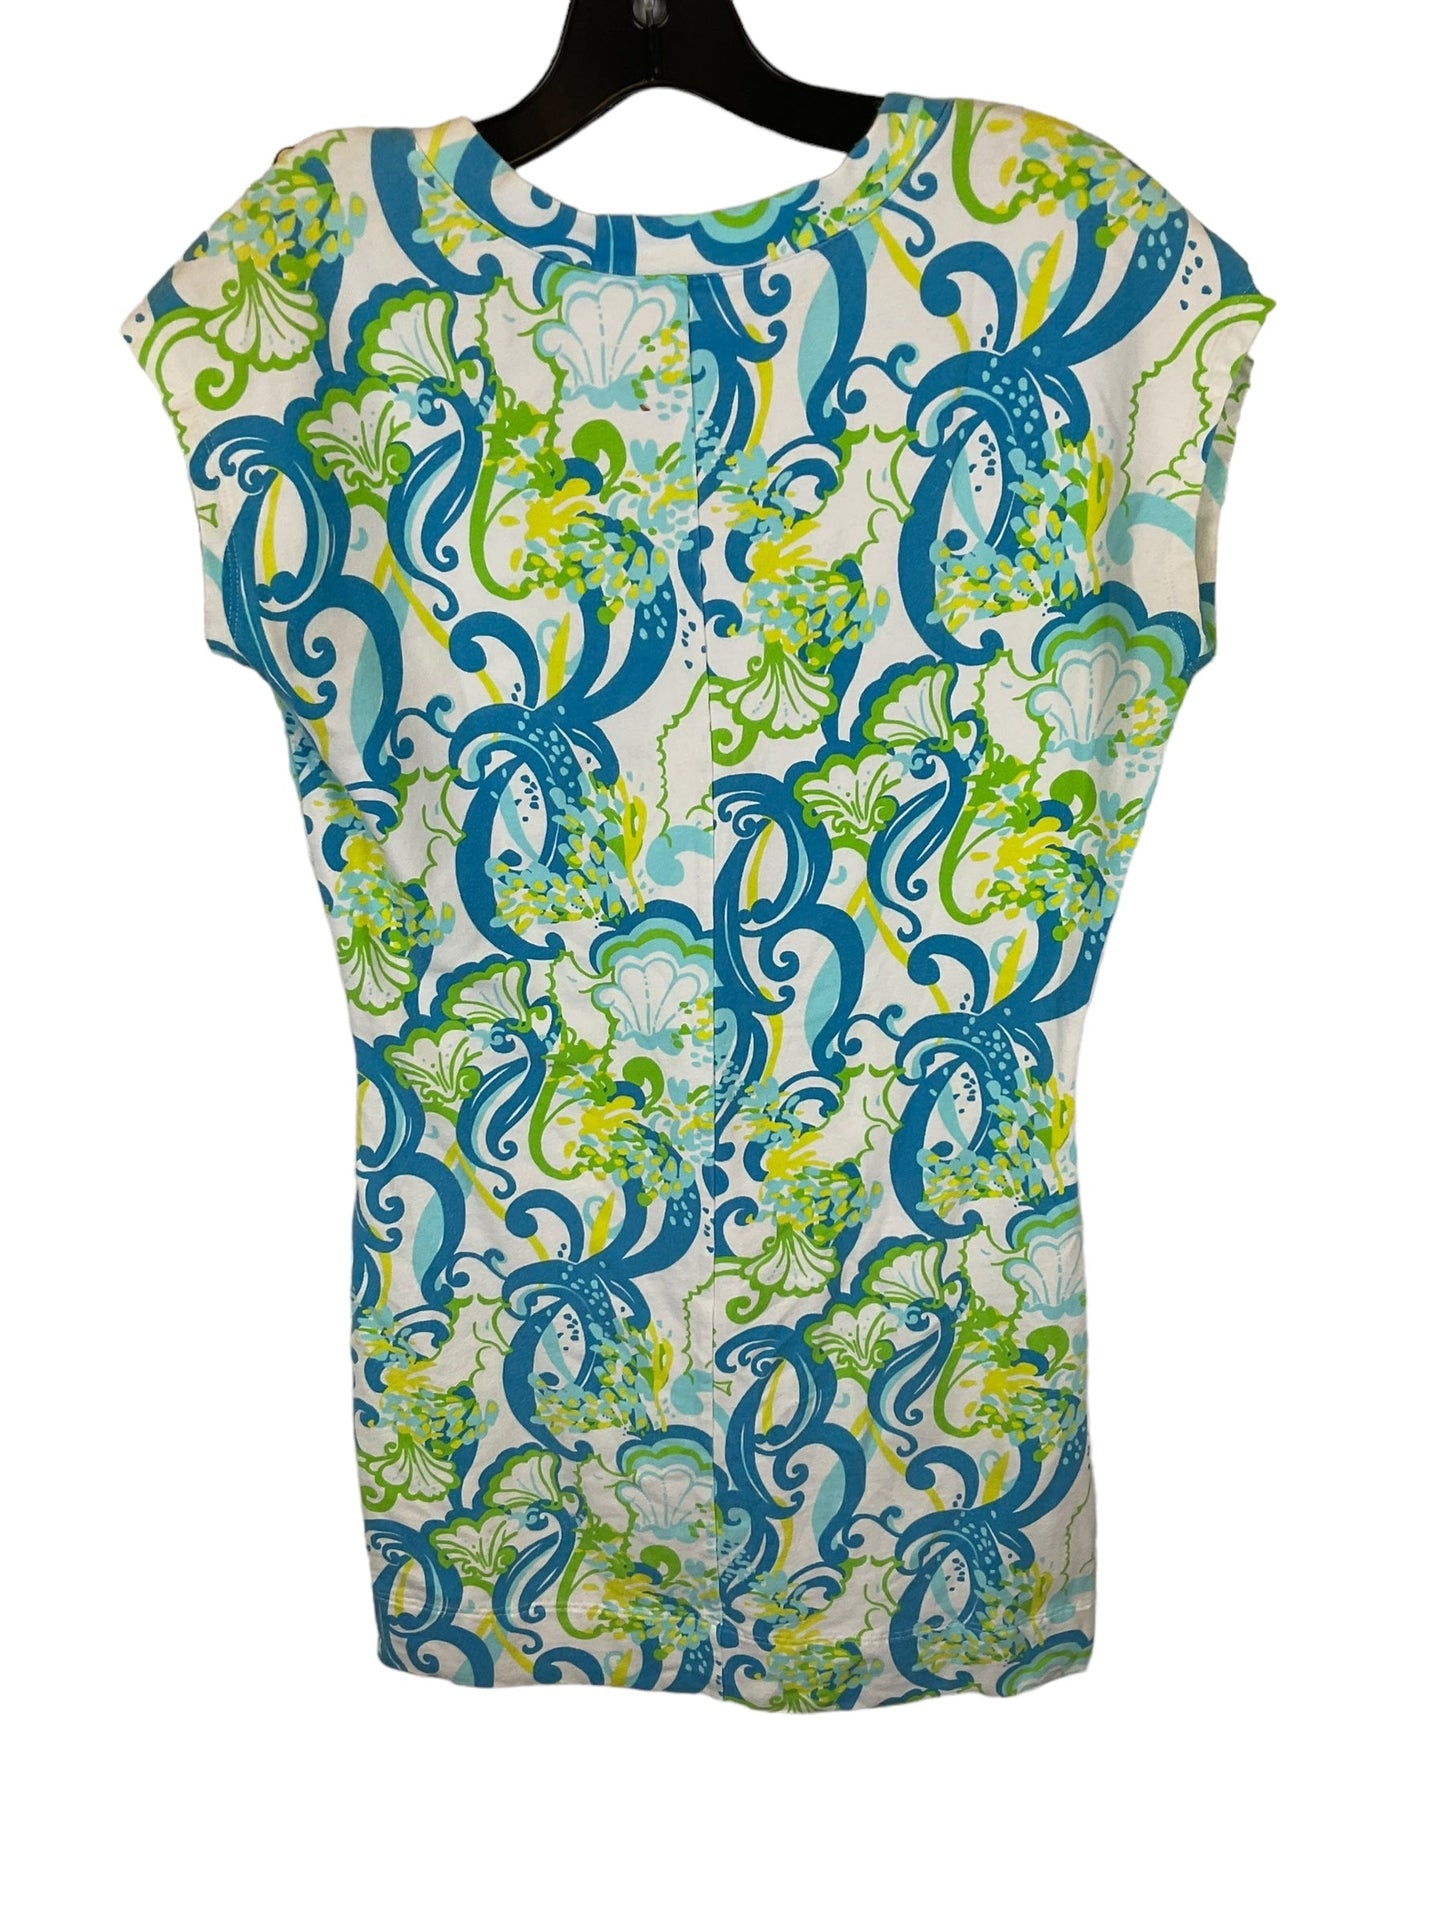 Multi-colored Dress Designer Lilly Pulitzer, Size S